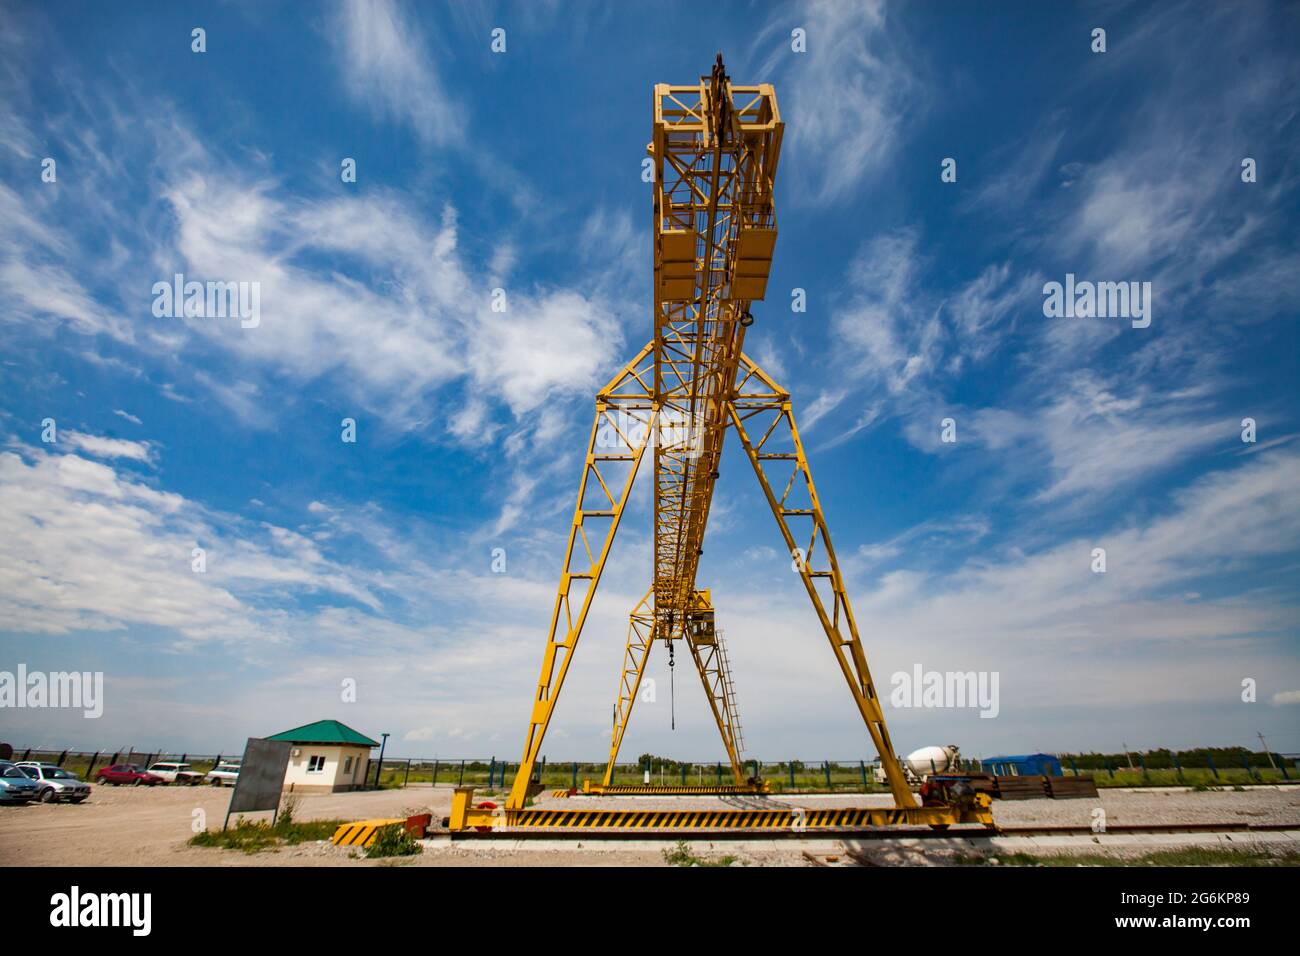 Power yellow gantry crane against scenic blue sky with white clouds. Stock Photo